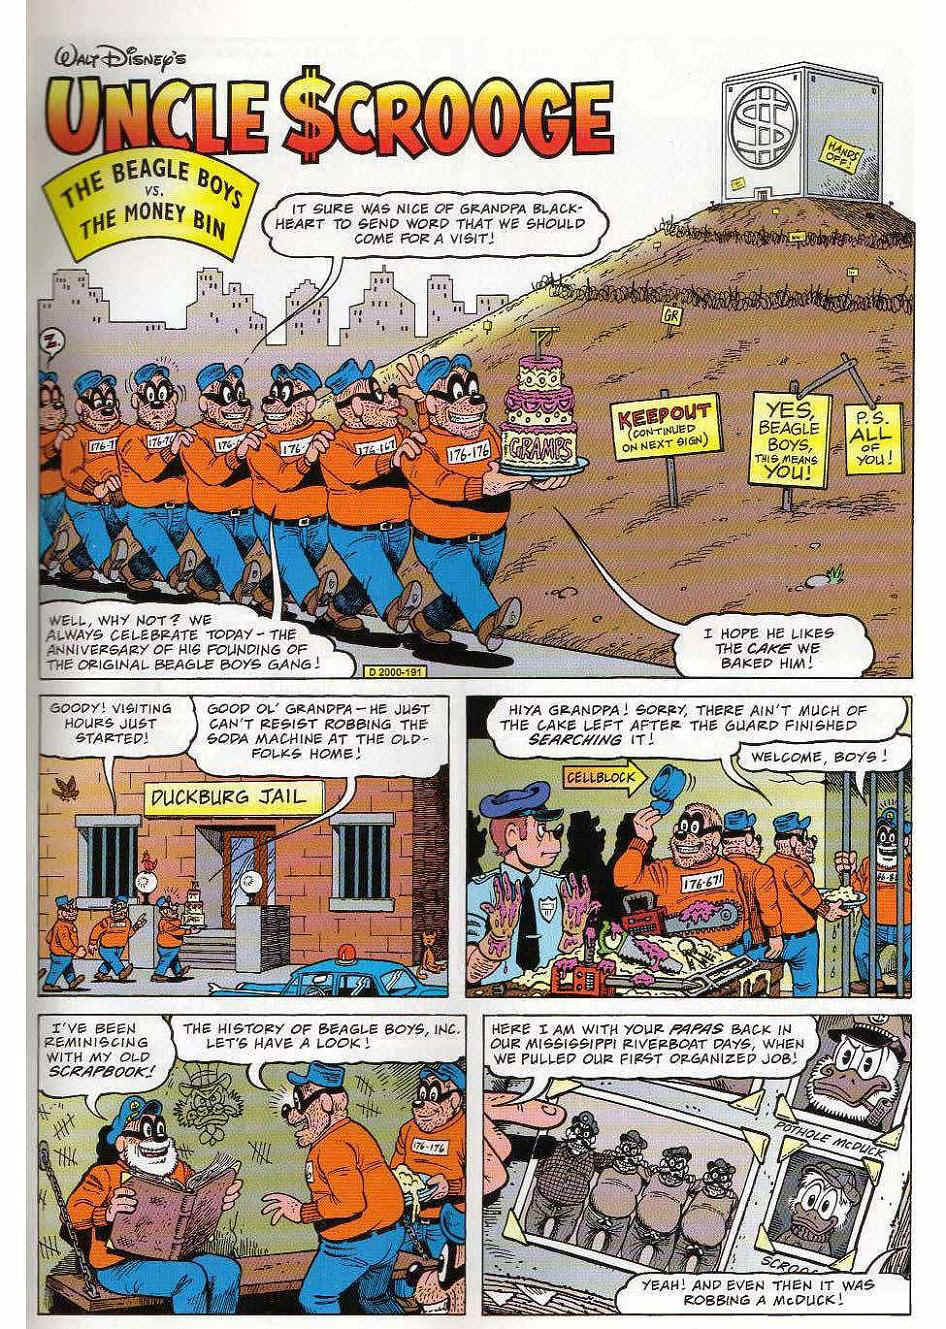 The Beagle Boys Vs. The Money Bin first page